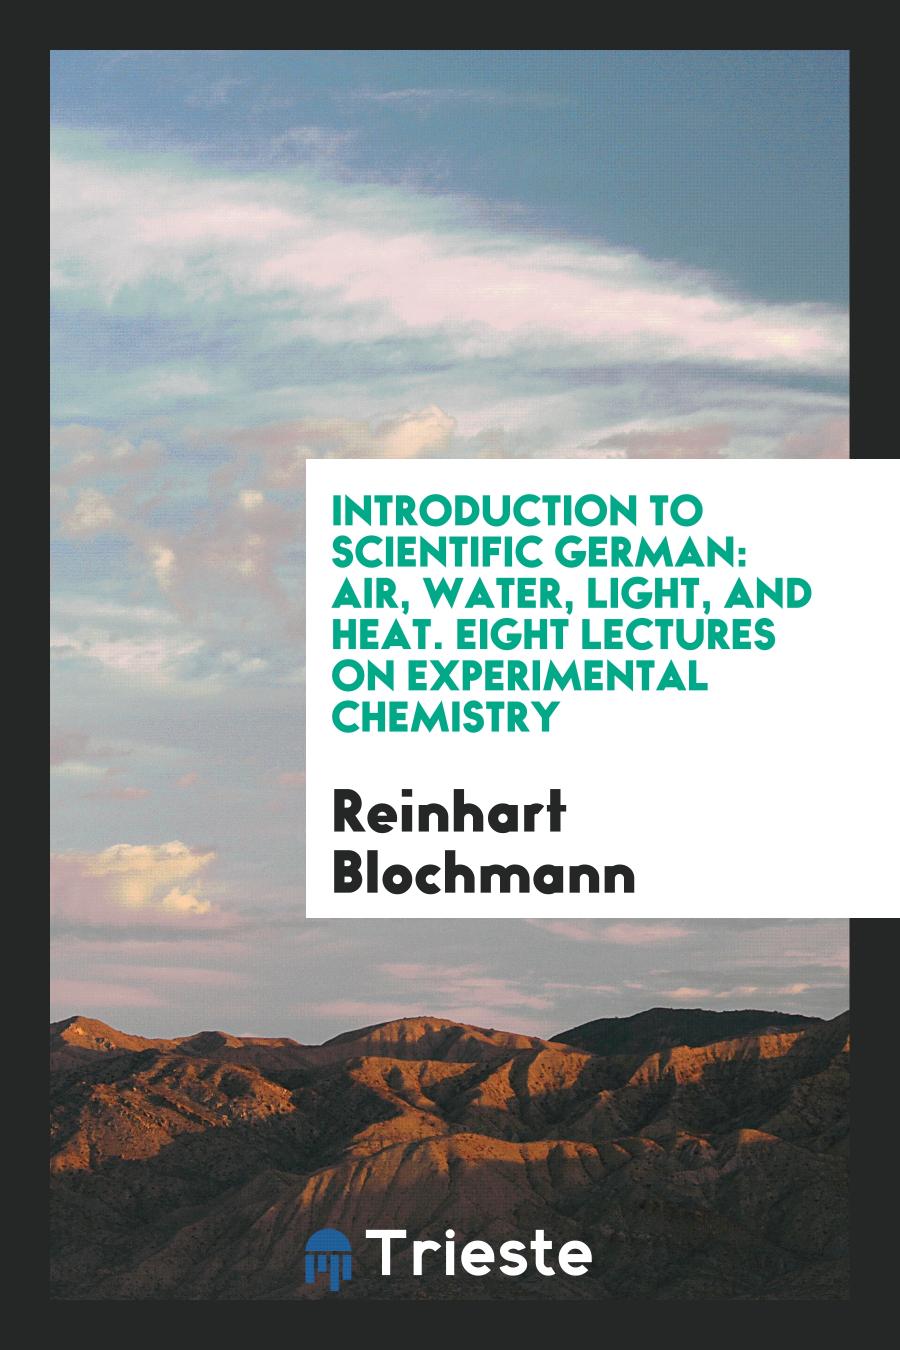 Introduction to Scientific German: Air, Water, Light, and Heat. Eight Lectures on Experimental Chemistry